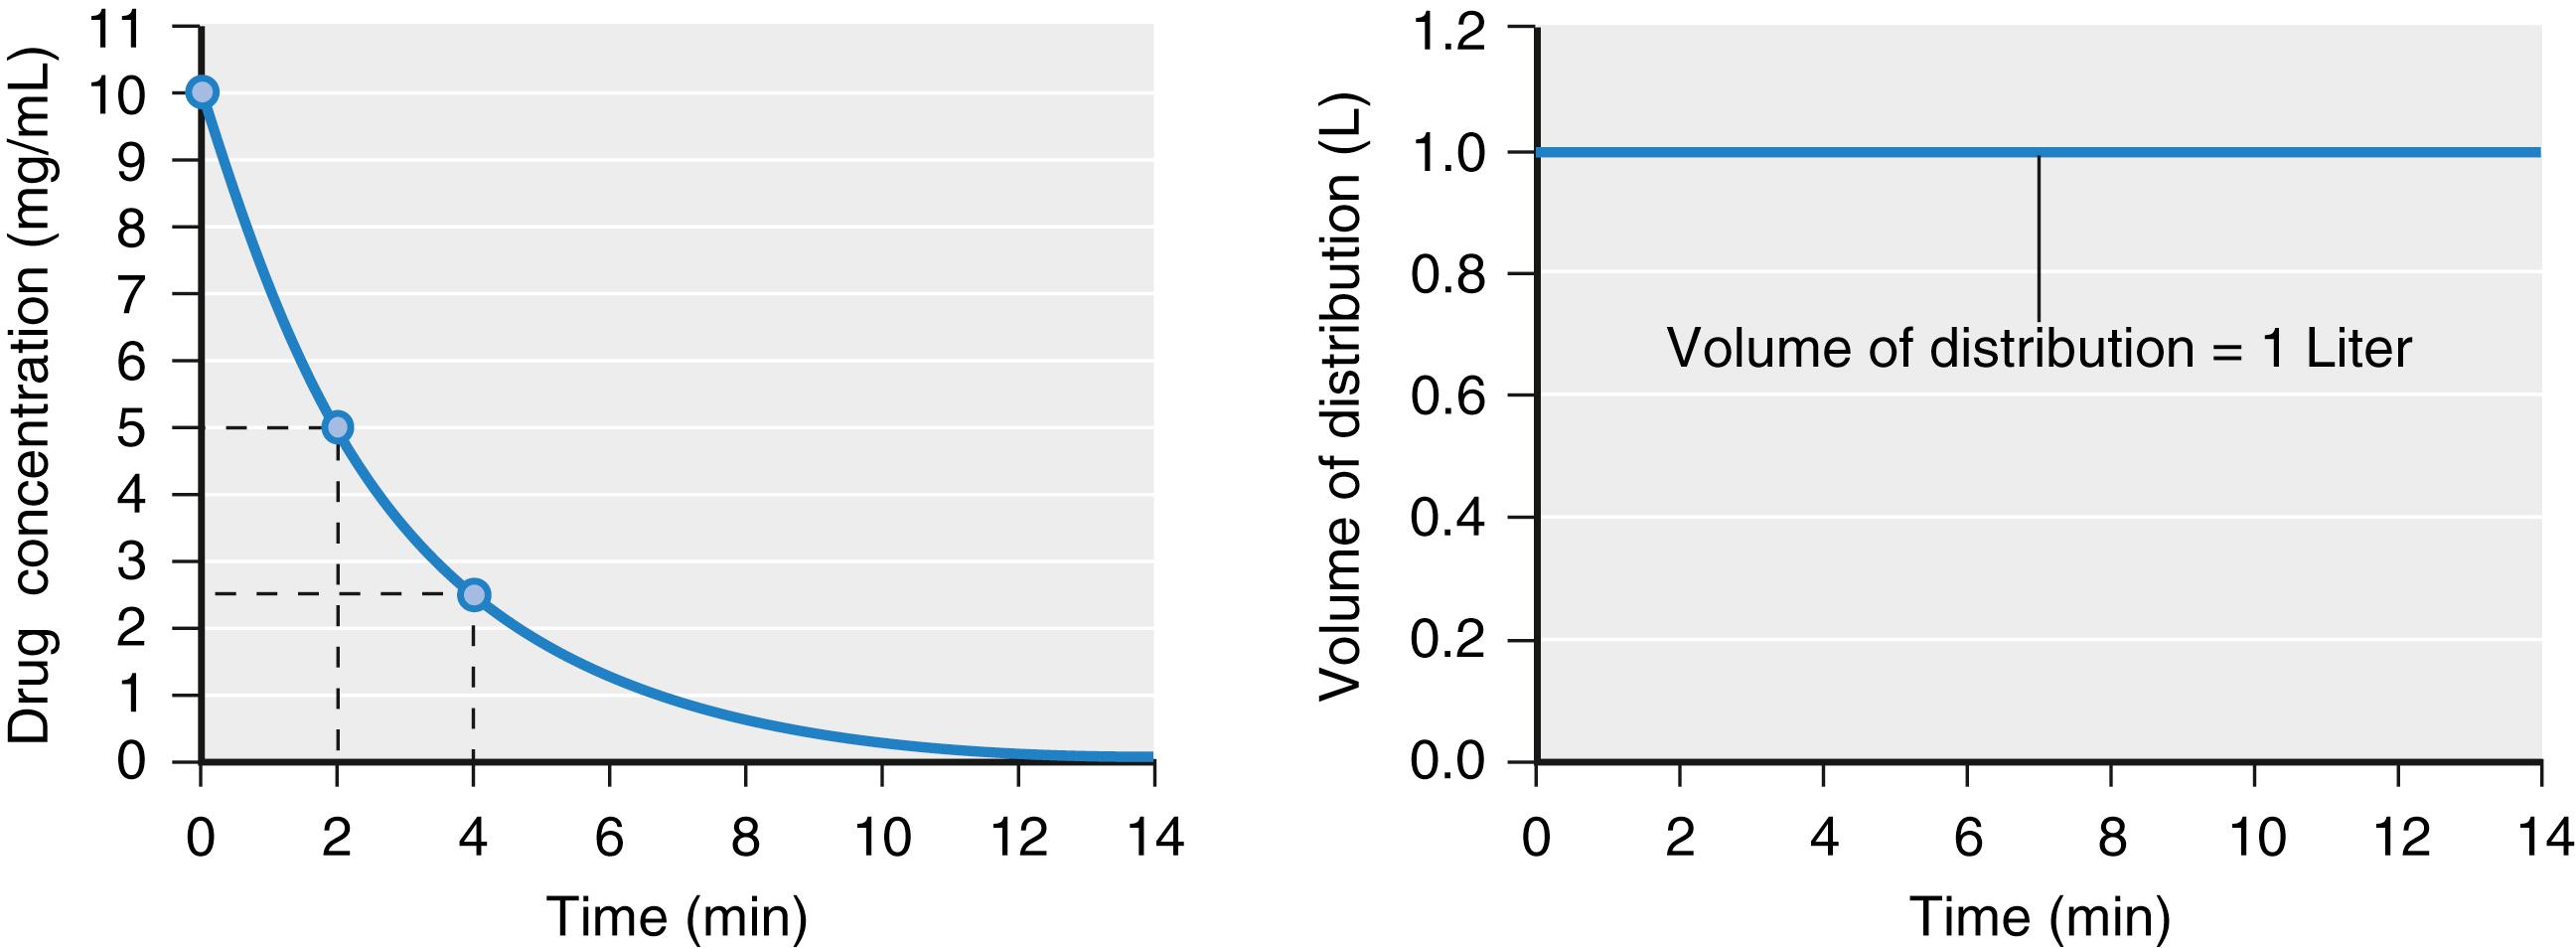 Fig.18.3, Simulation of concentration (left panel) and distribution volume (right panel) changes over time following a bolus dose for a single-tank (one-compartment) model. The distribution volume remains constant throughout.